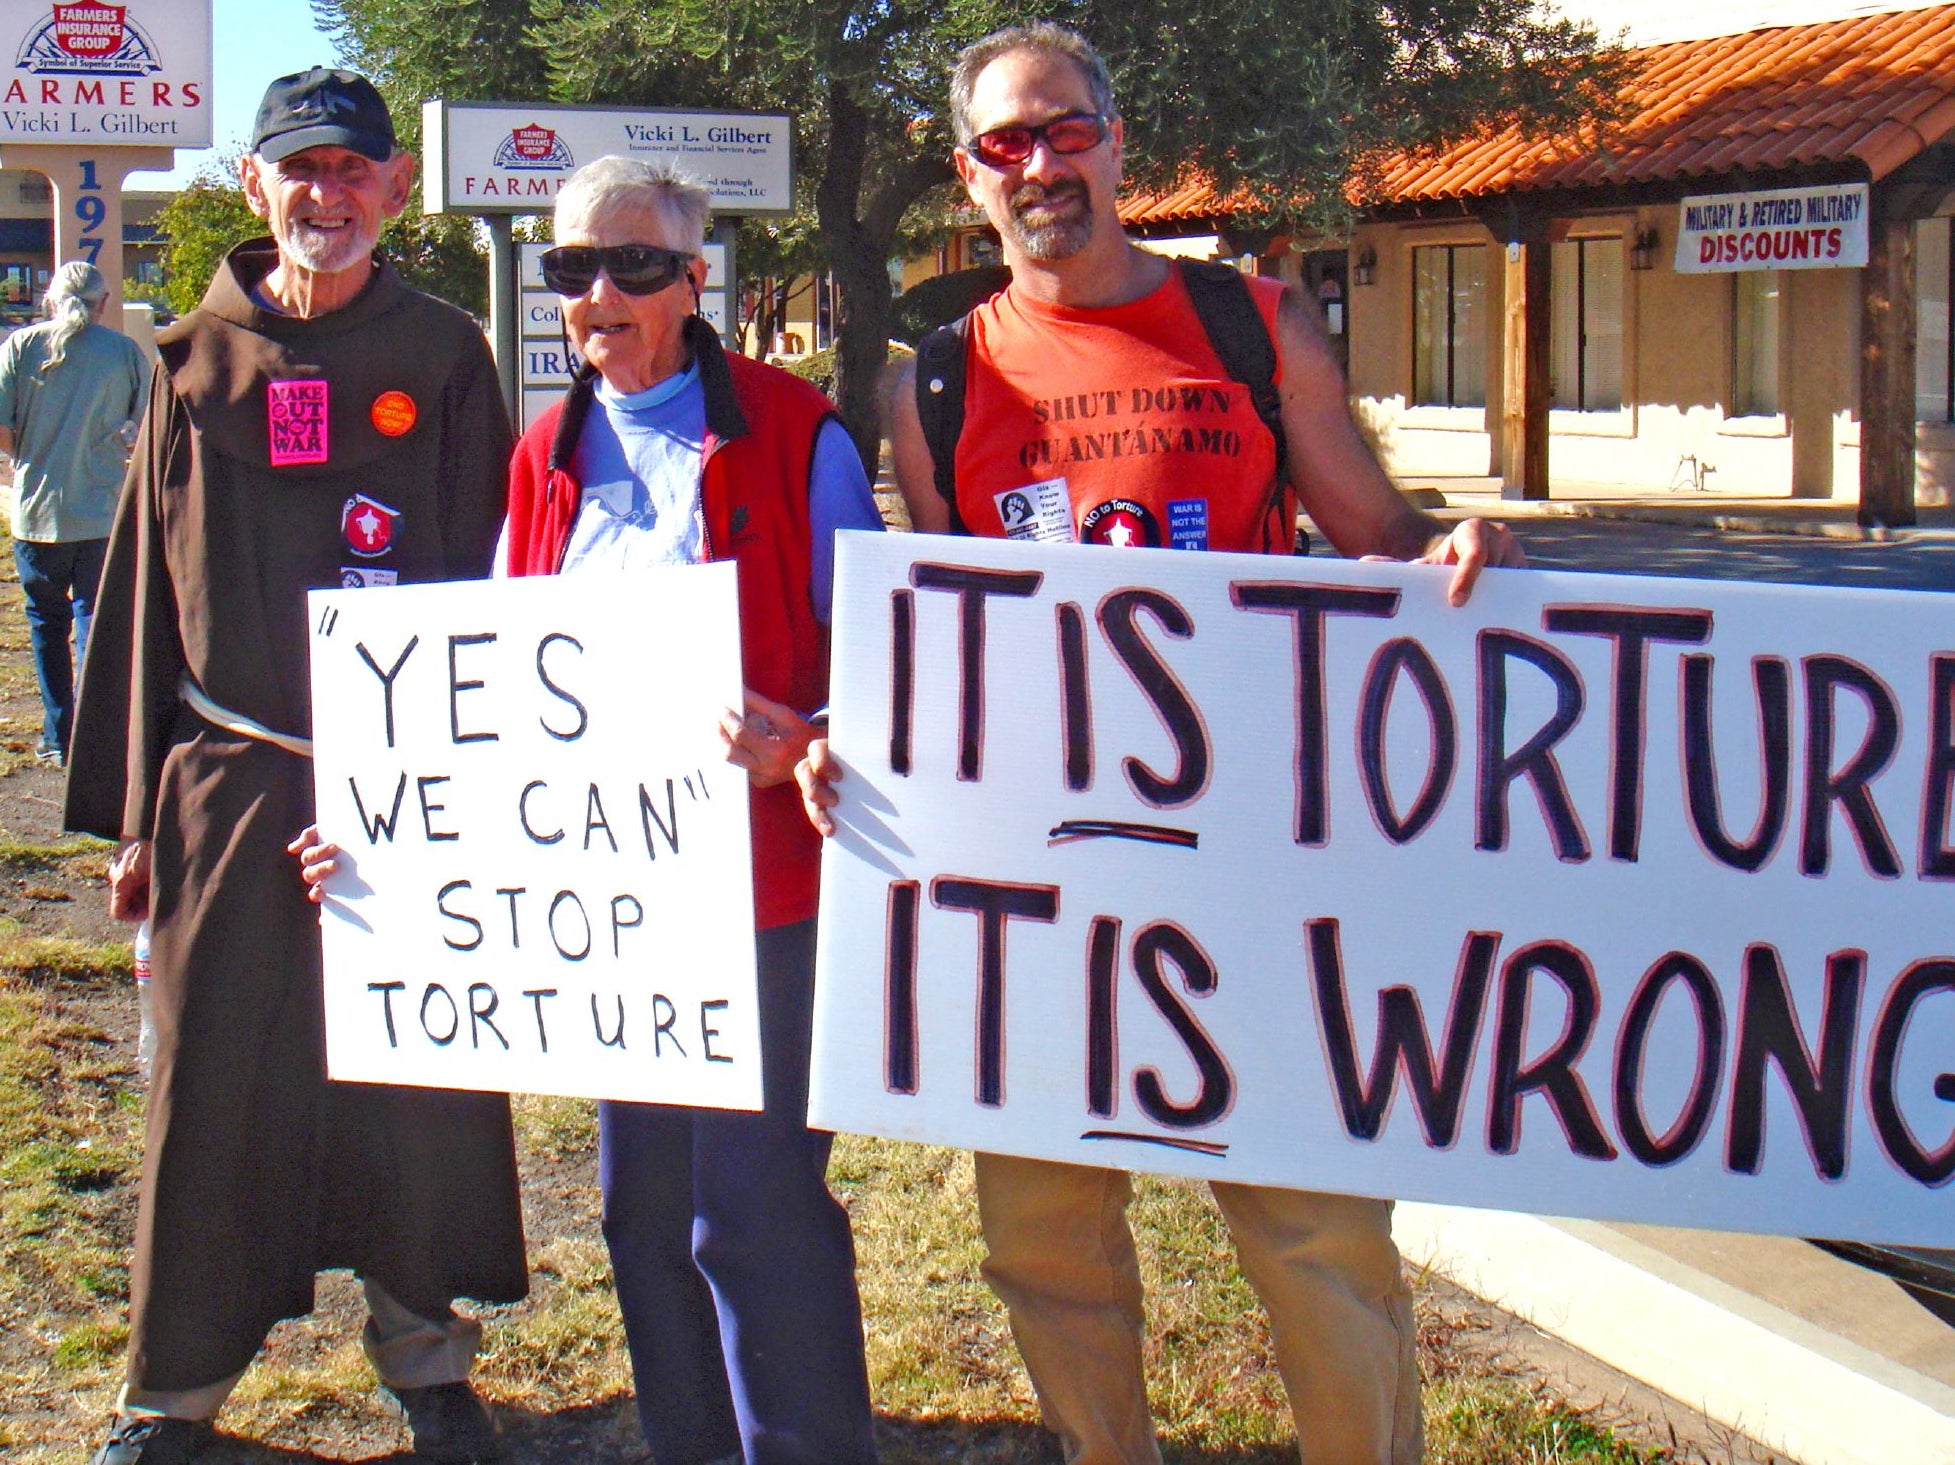 Sister Rice with Louis Vitale and Jim Haber protest US policy on torture at Ft. Huachuca, Arizona